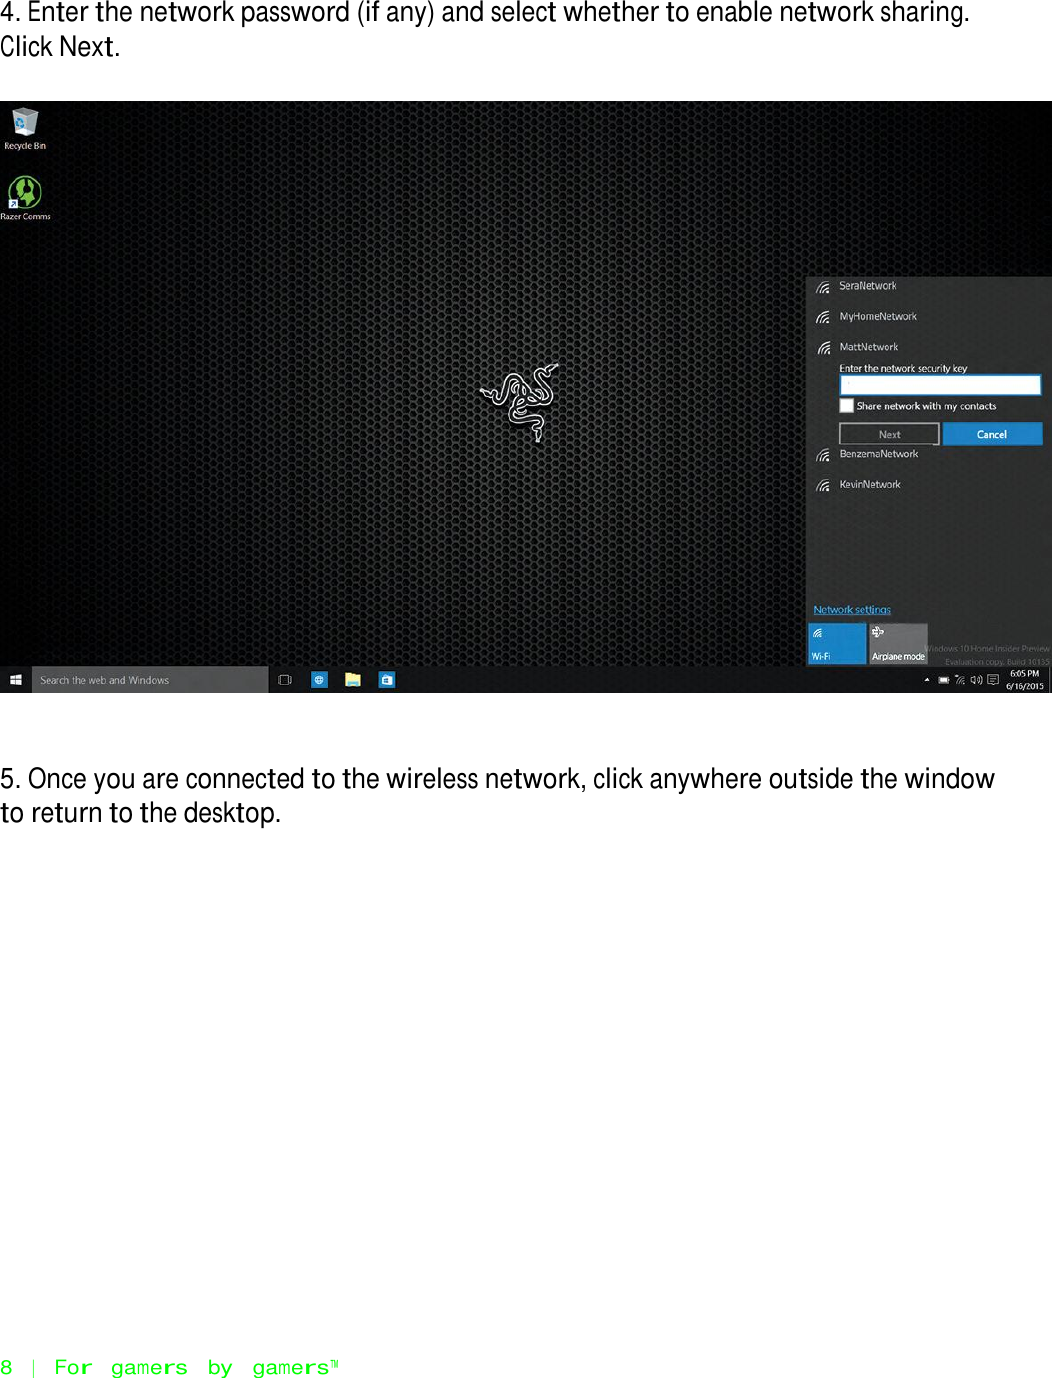        4. Enter the network password (if any) and select whether to enable network sharing. Click Next.                                   5. Once you are connected to the wireless network, click anywhere outside the window to return to the desktop.                          8   |   For   gamers   by   gamers™ 